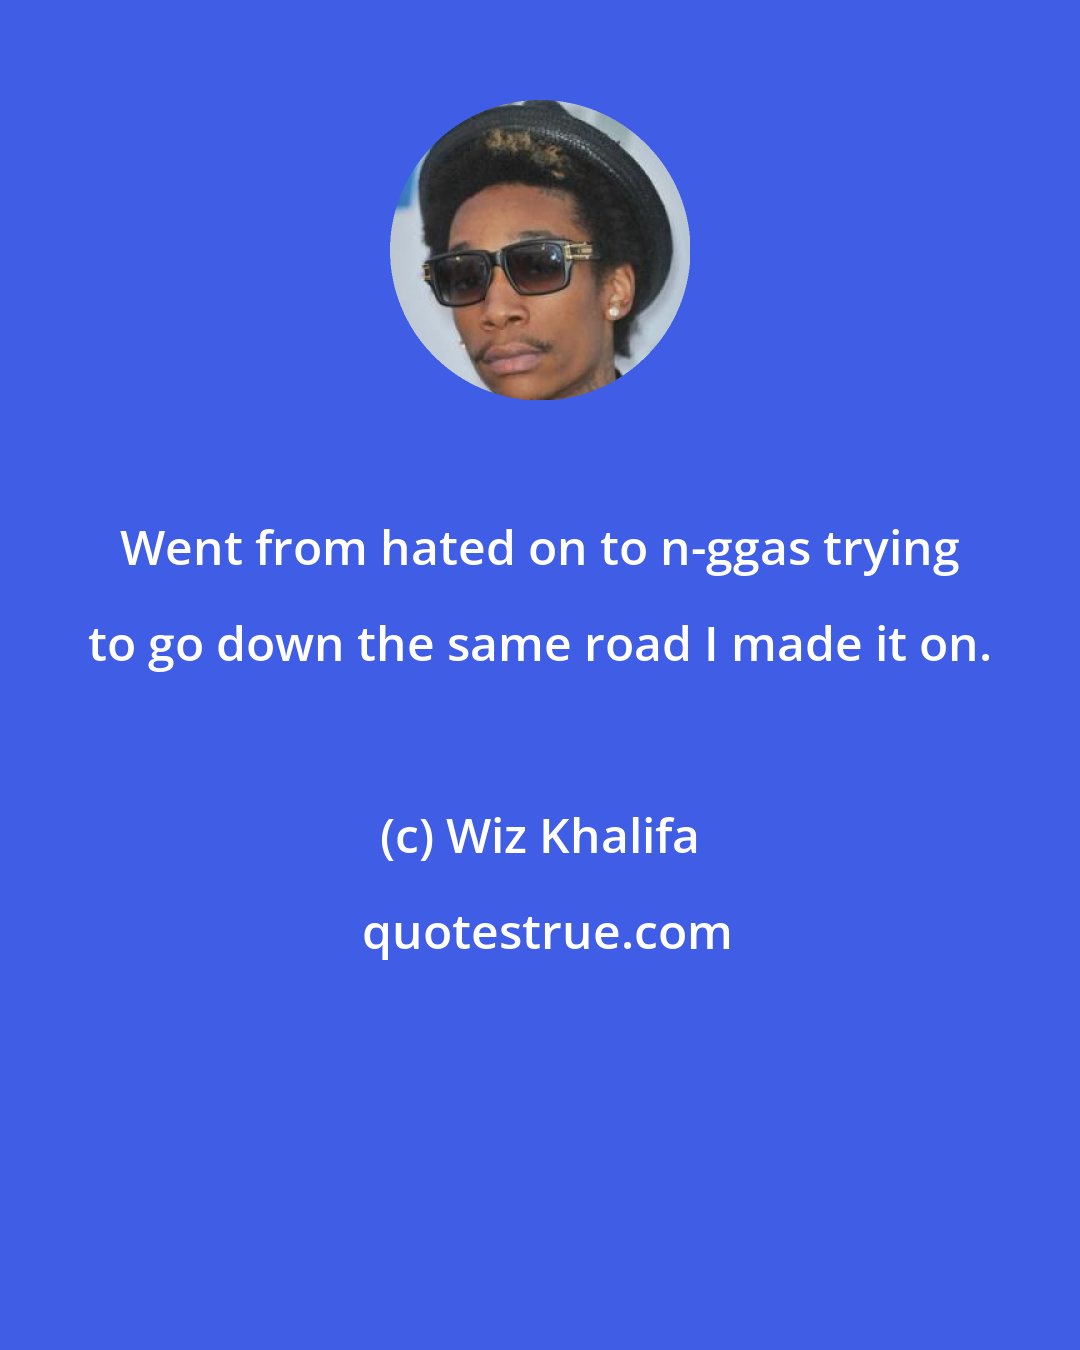 Wiz Khalifa: Went from hated on to n-ggas trying to go down the same road I made it on.